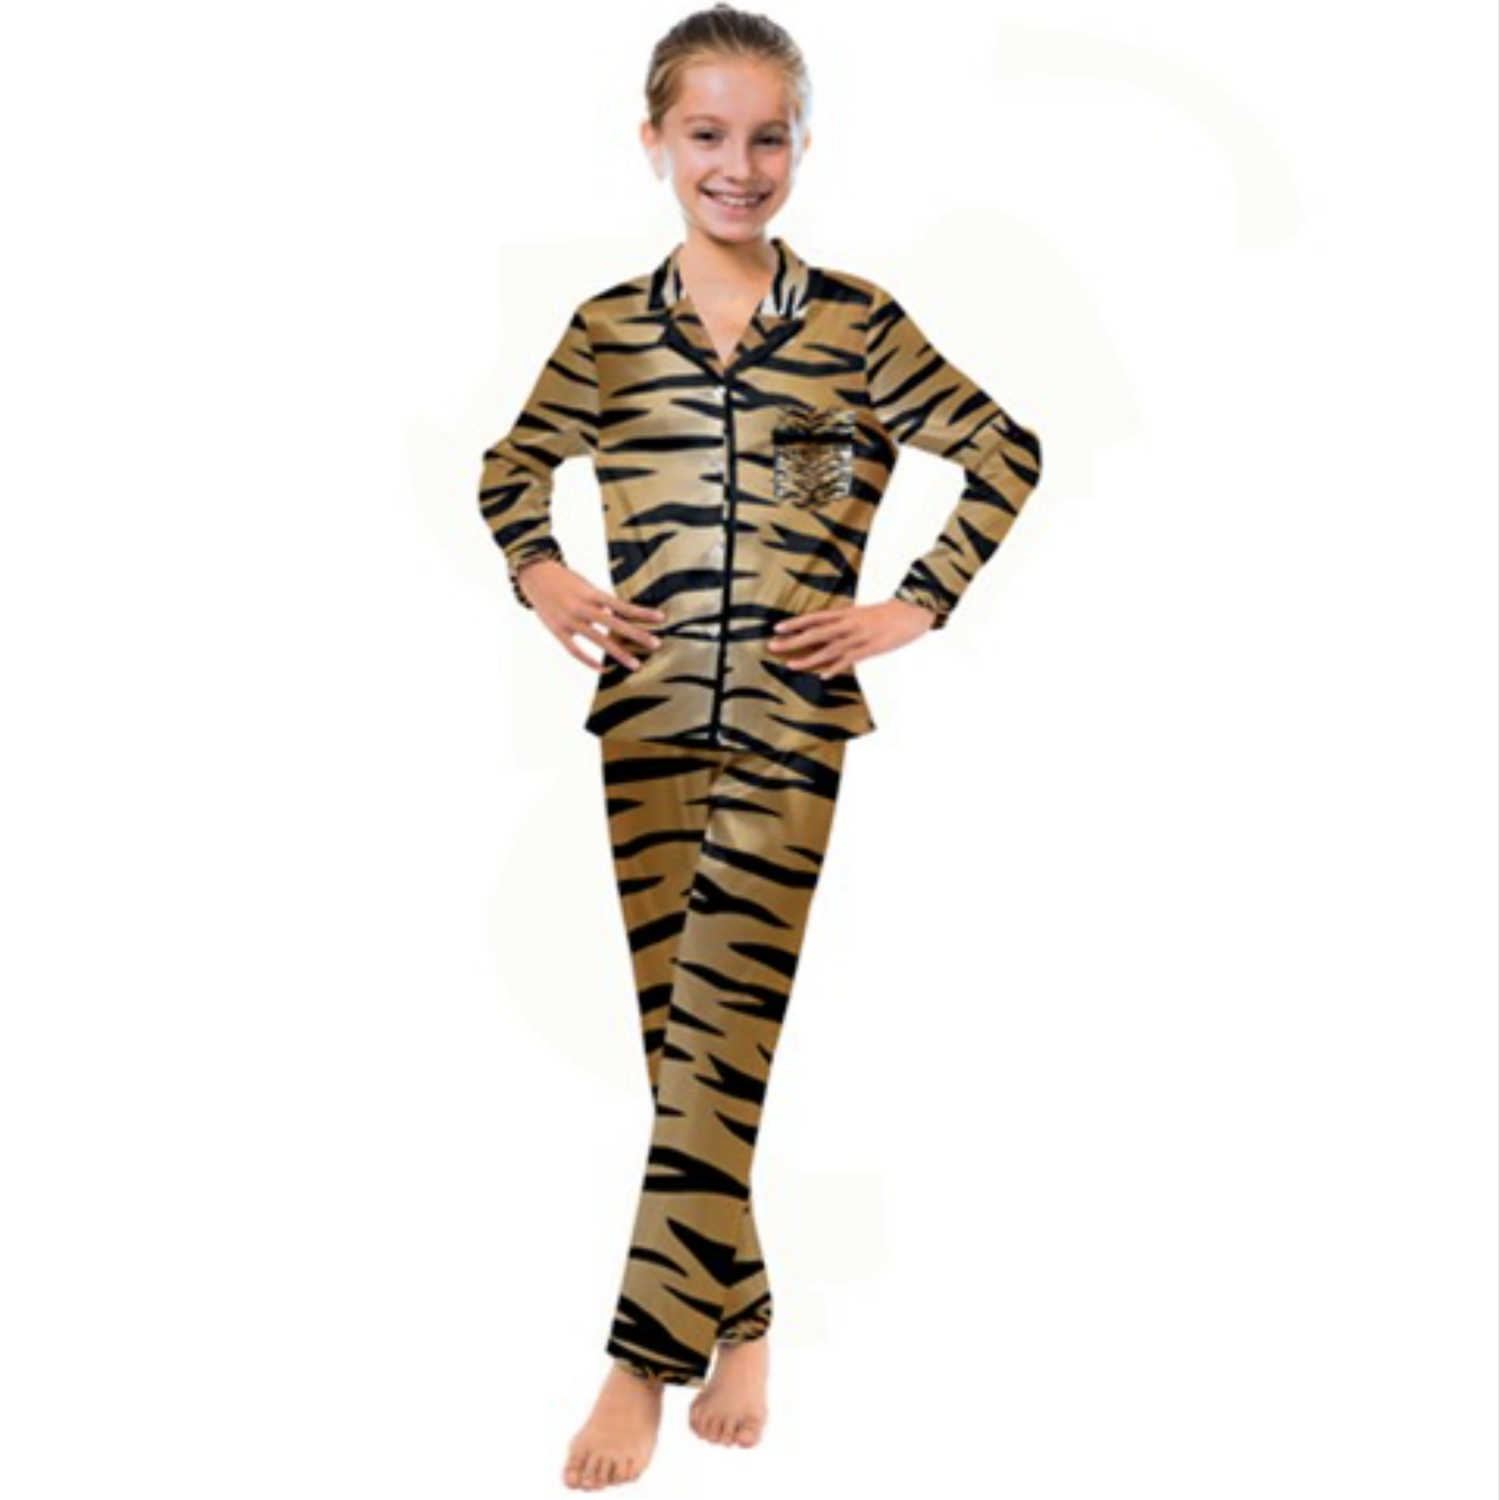 👸🏽🤴🏽🐅 Satin Pajamas Set For Kids Classic Tiger print, Feline print, Animal's print, Satin Pajamas Set, Satin PJs, 12 sizes 2 to 18, gift, gift for kids